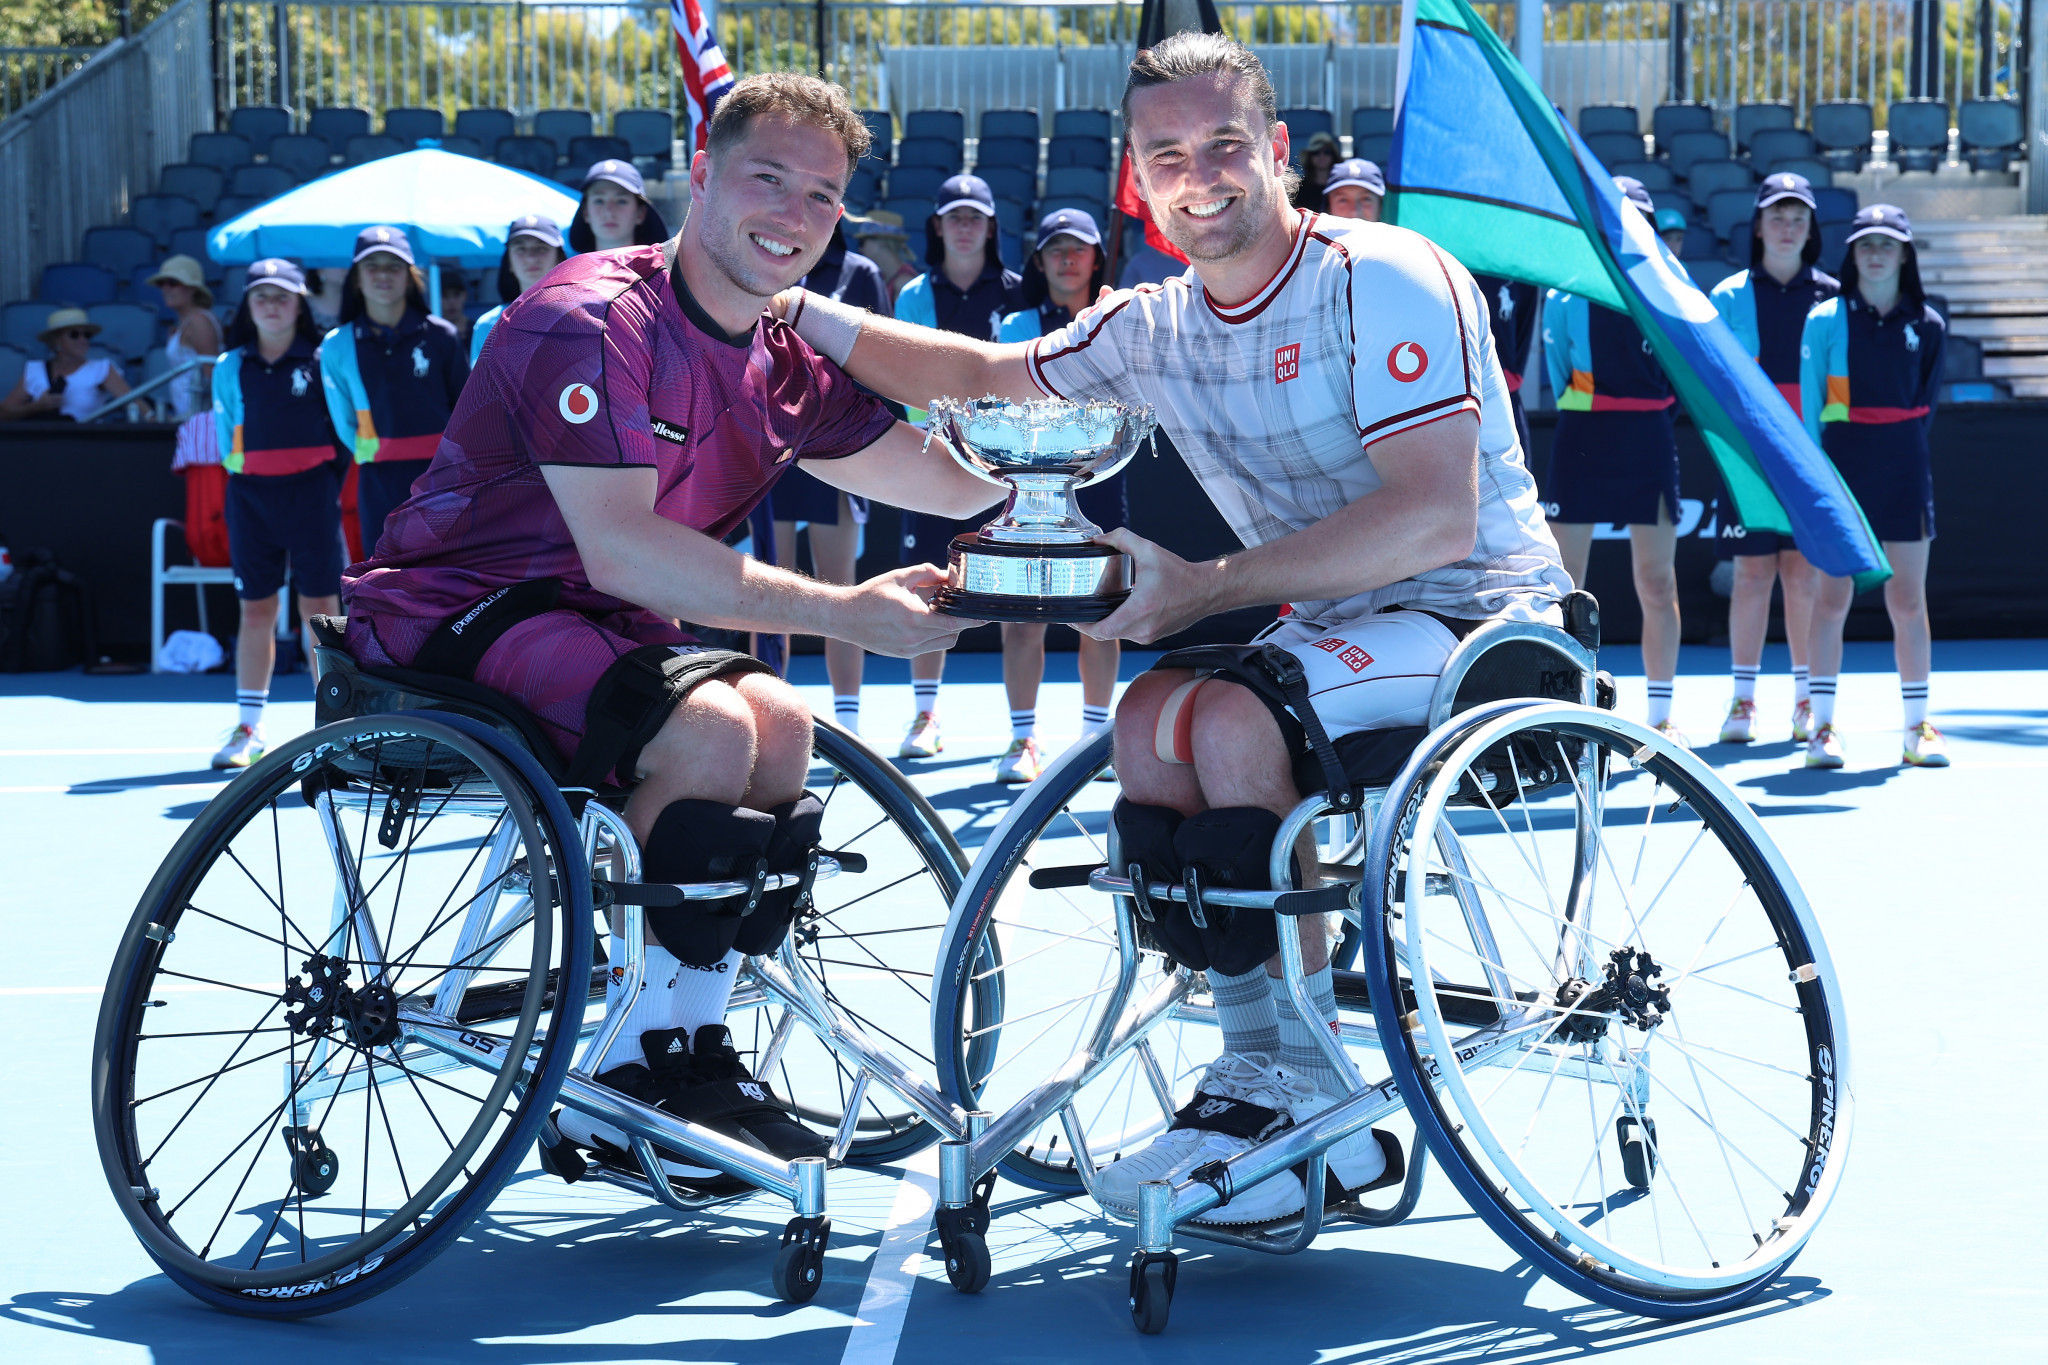 Britain's Alfie Hewett, left, and Gordon Reid, right, won their fourth consecutive men's doubles Australian Open title ©Getty Images